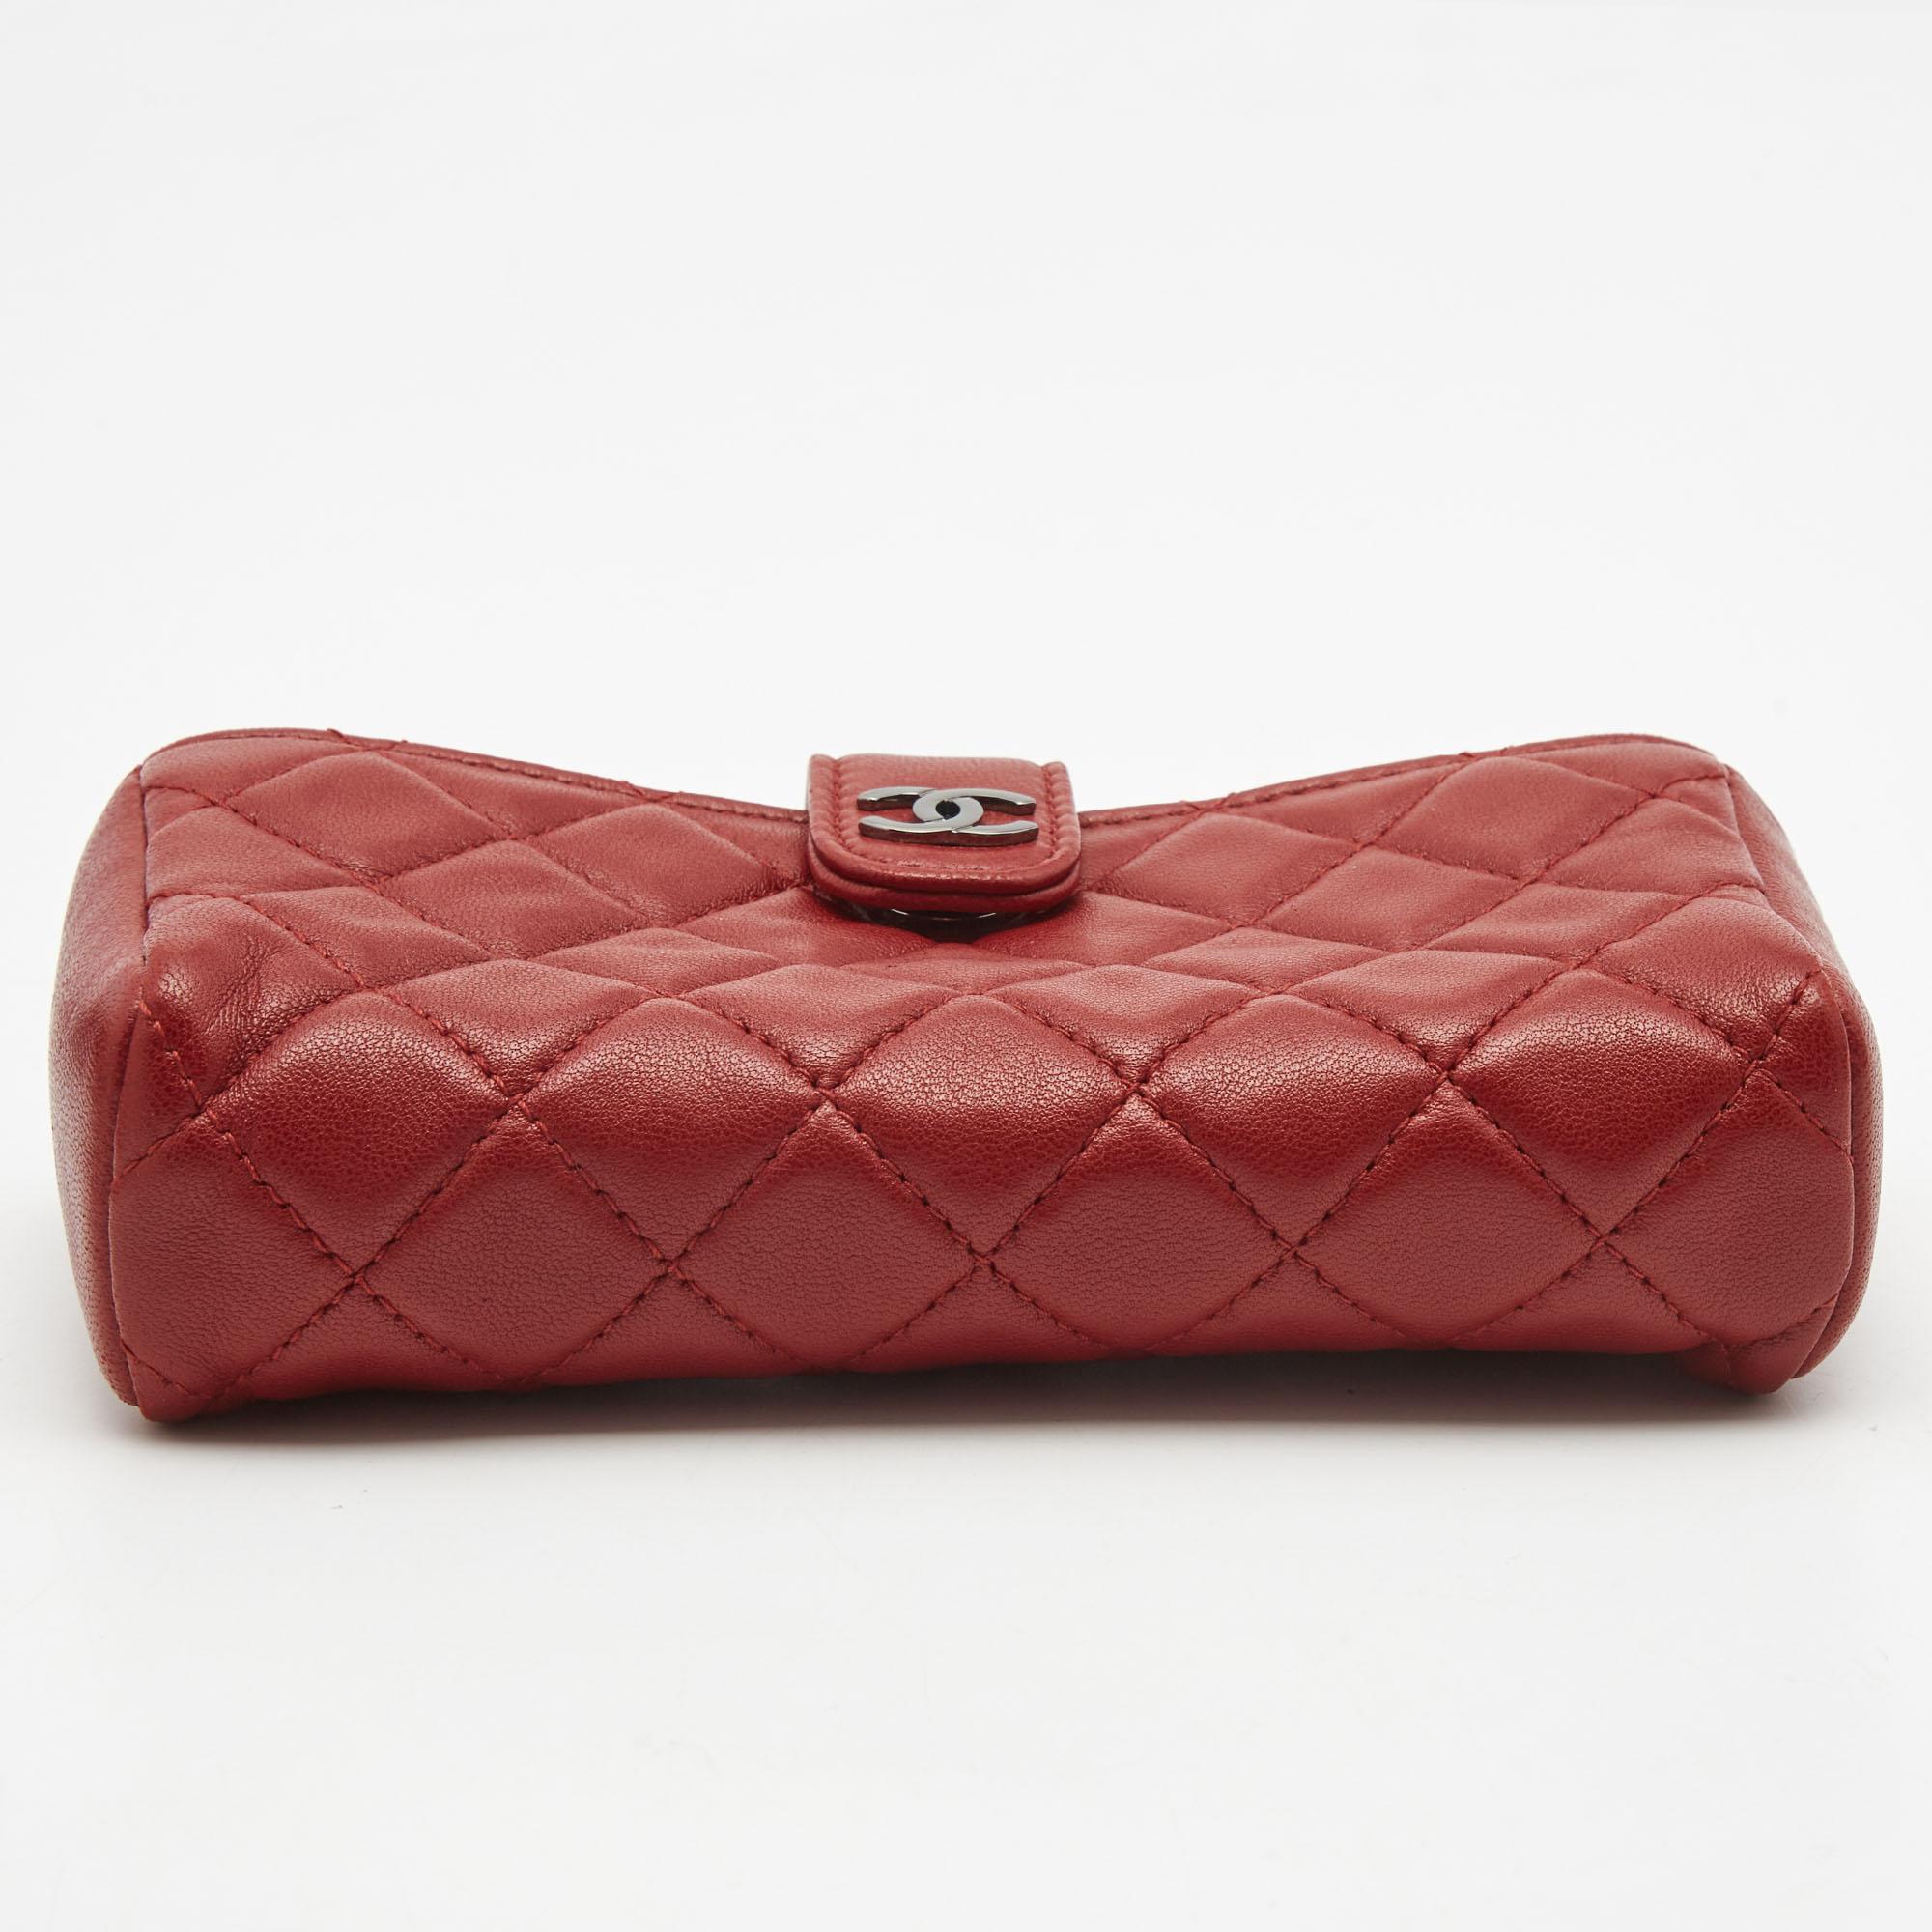 Why stop at owning a Chanel bag when you can also carry your phone in a lovely leather pouch with the brand's signature quilt? This creation from Chanel is one tech accessory you will love to flaunt. It has a CC-adorned flap that reveals a zip